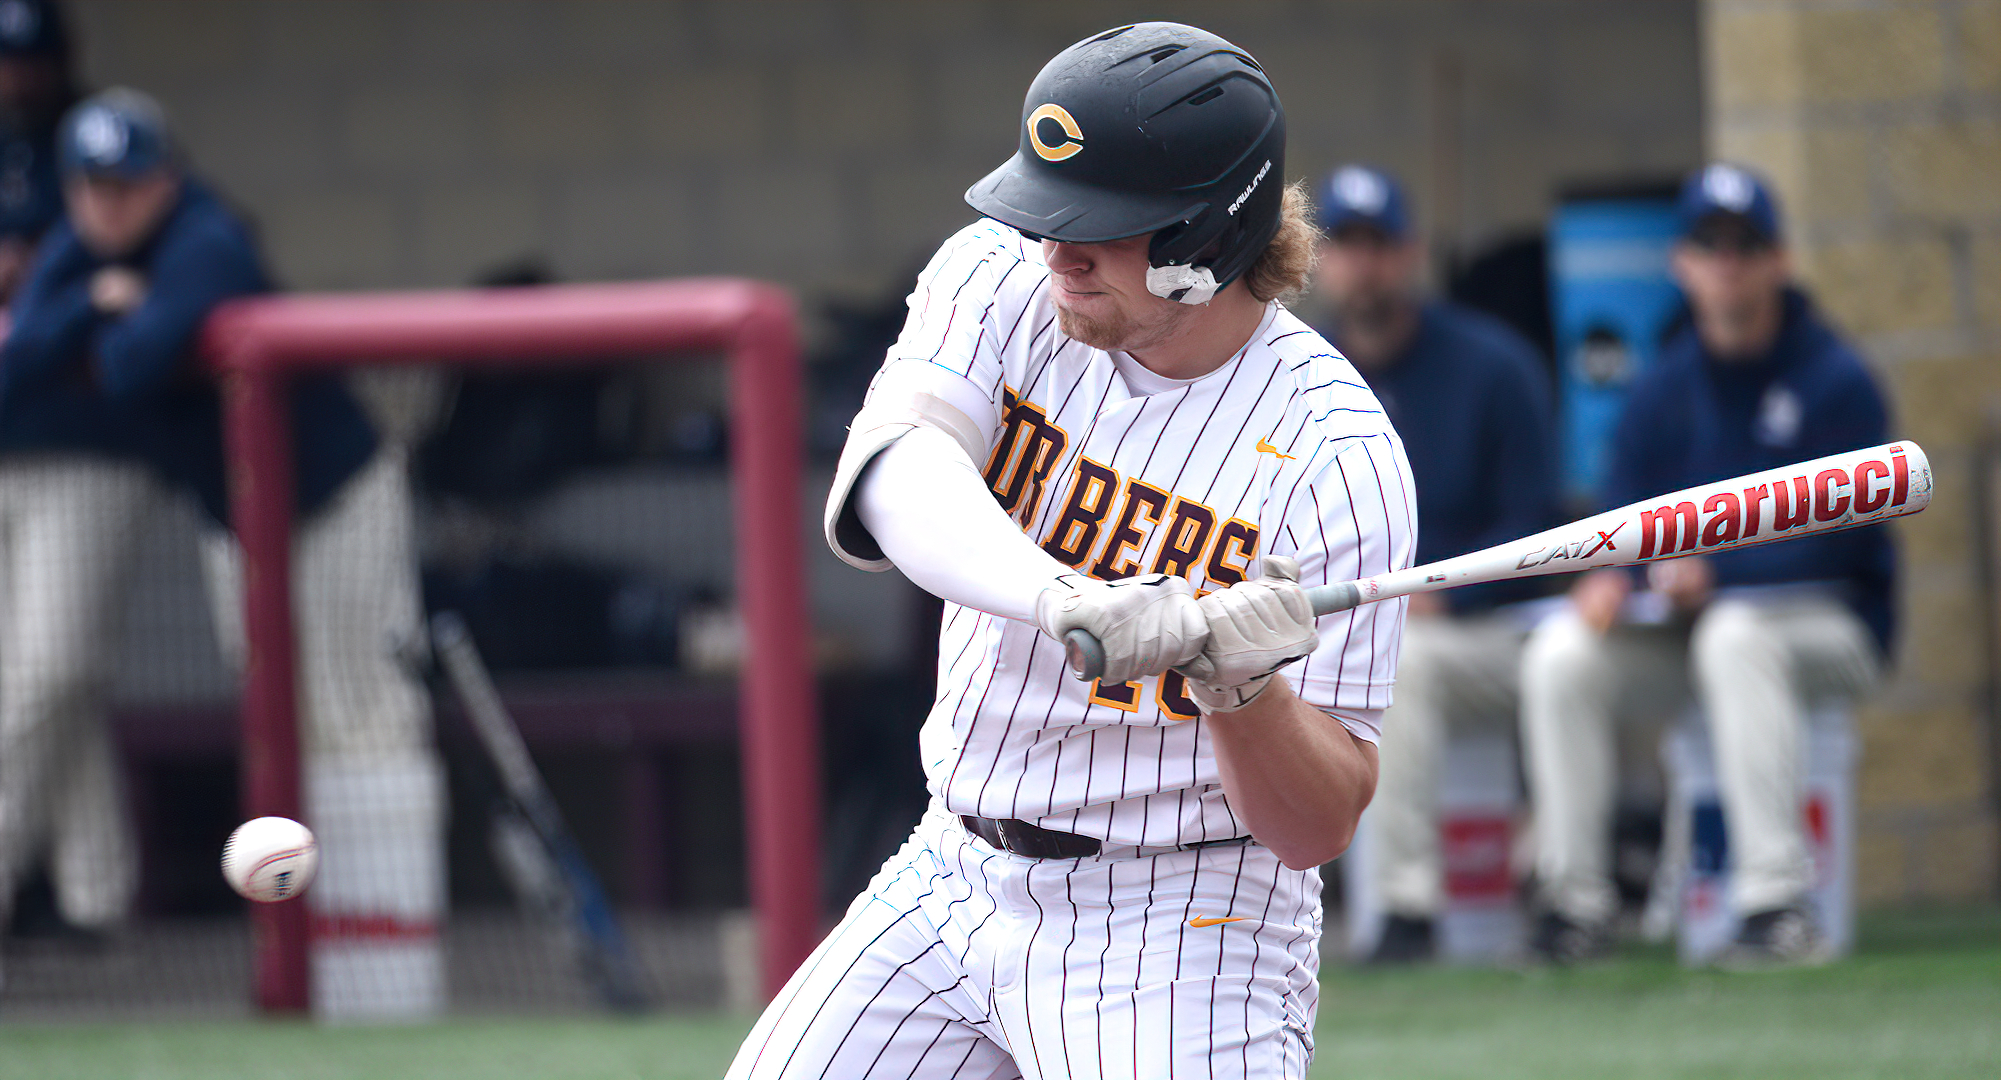 Isaac Henkemeyer-Howe had two hits in each game of the Cobbers' doubleheader against St. Scholastica.